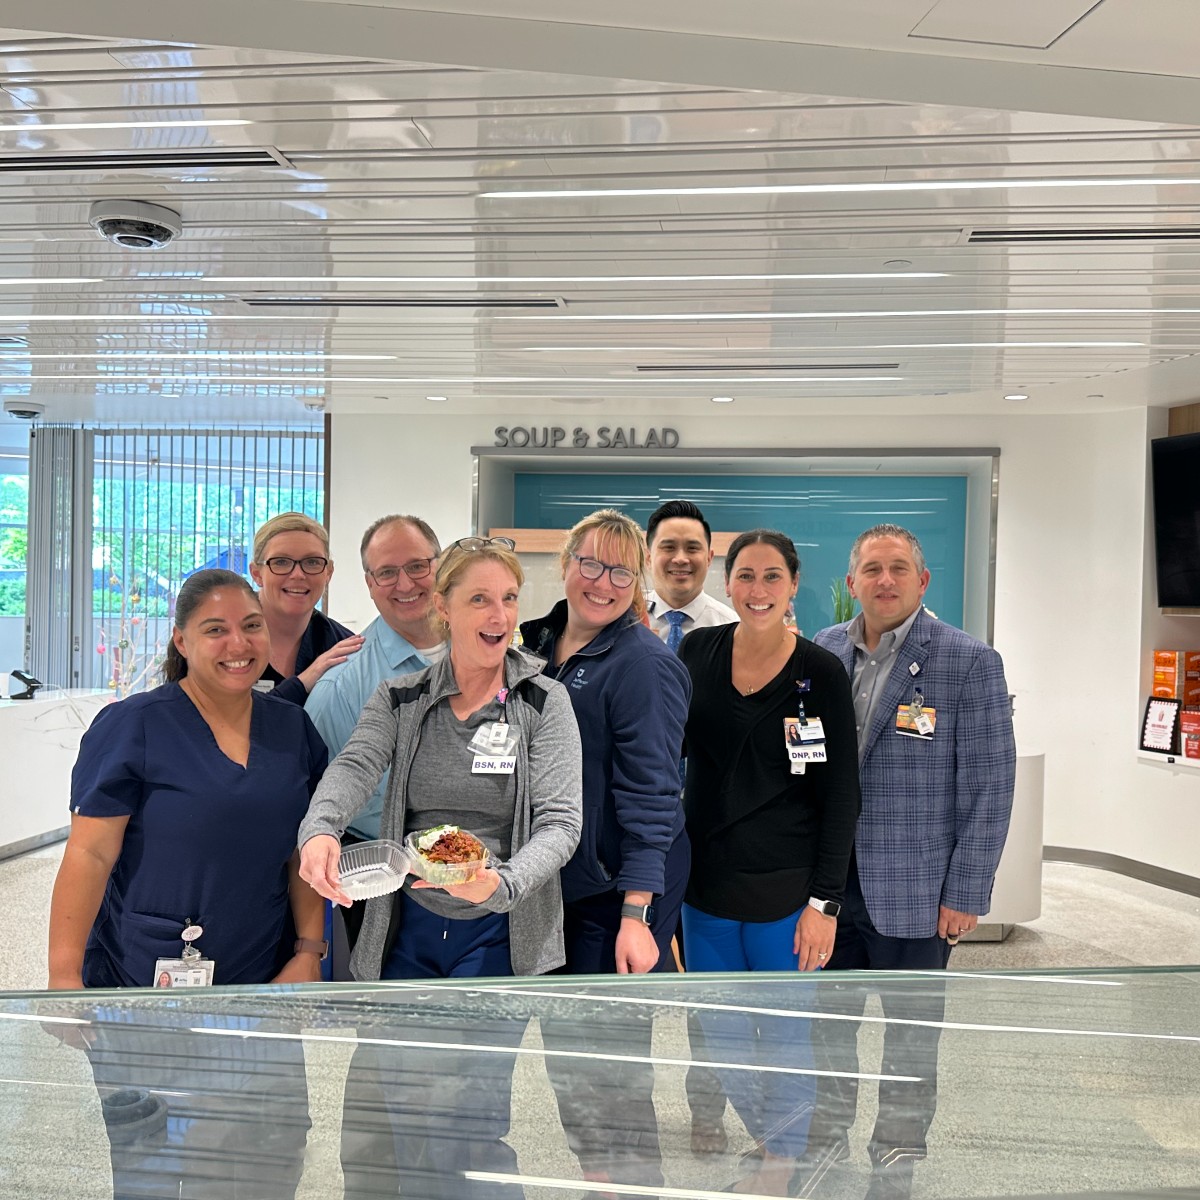 Happy Nurses Week to our staff in New Jersey! Thank you for everything you do and for providing patients with uncompromising care. #TheJeffersonNurse